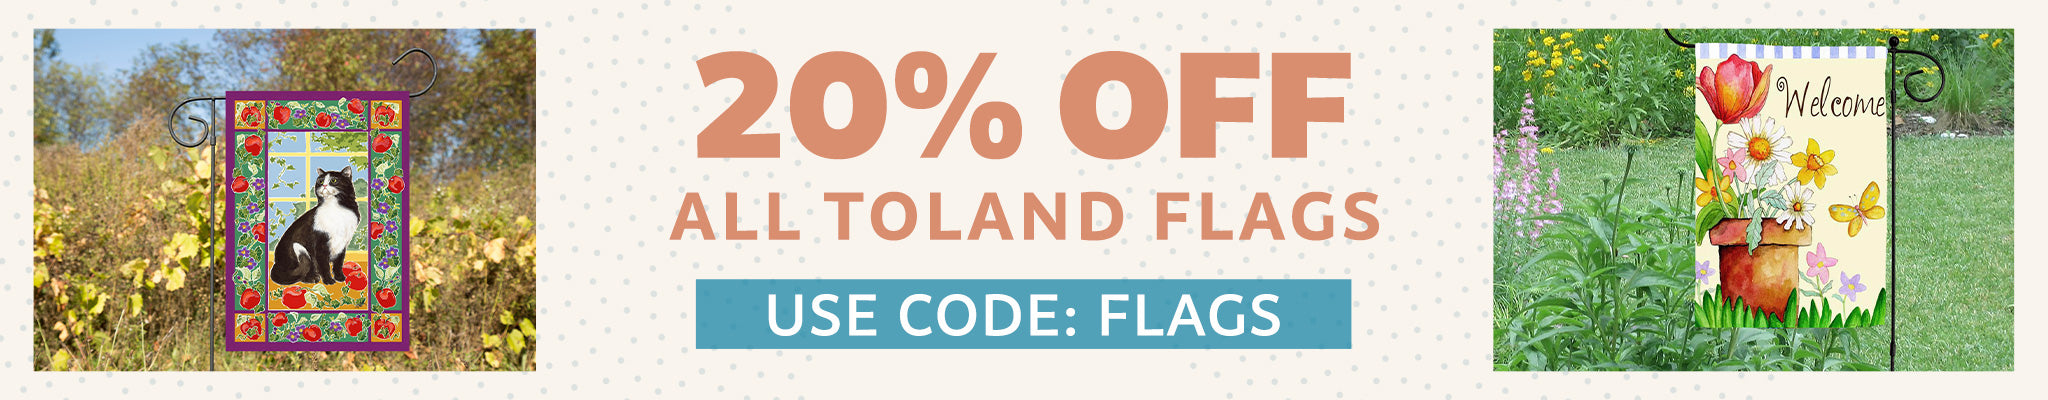 10% OFF All Toland Mats | Use code: MATS10 | Shop Now